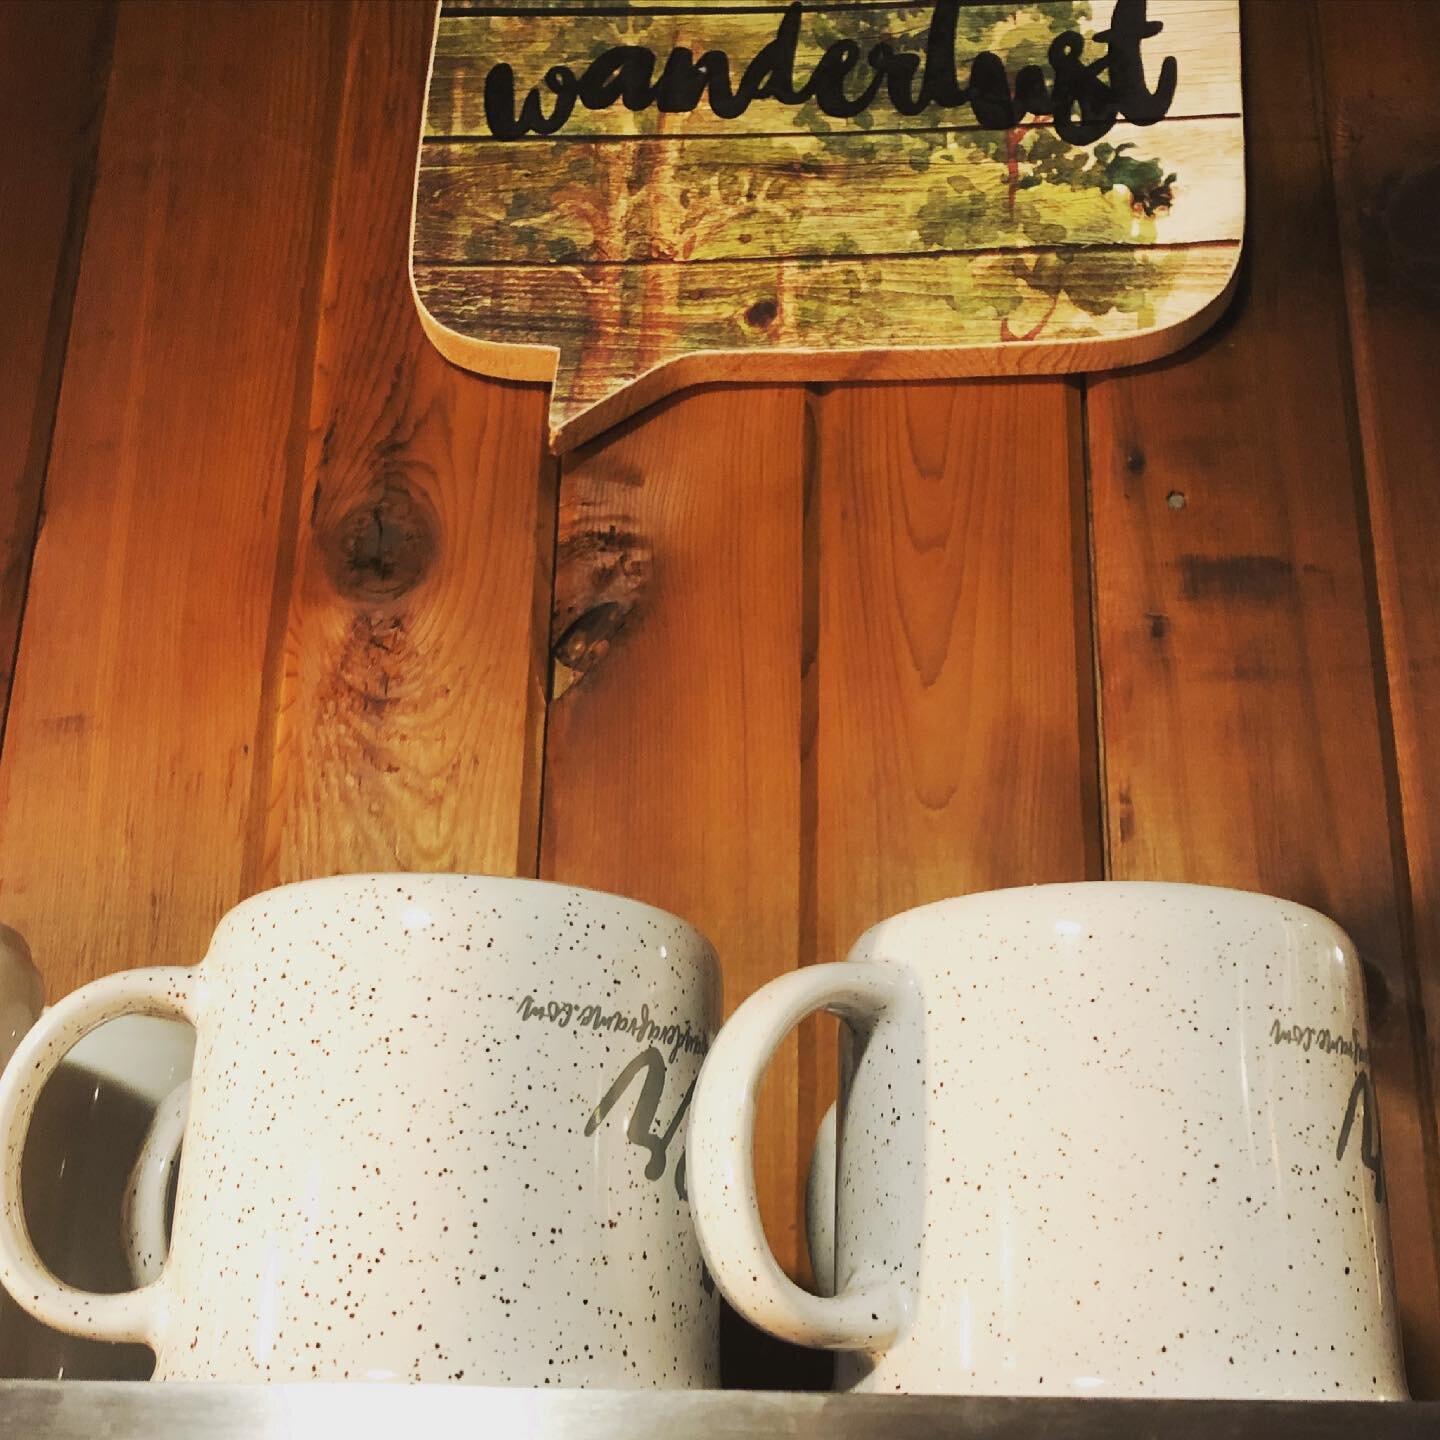 Everything you need, including campy mugs adored by all of the guests welcomed at Wander #wanderaframe